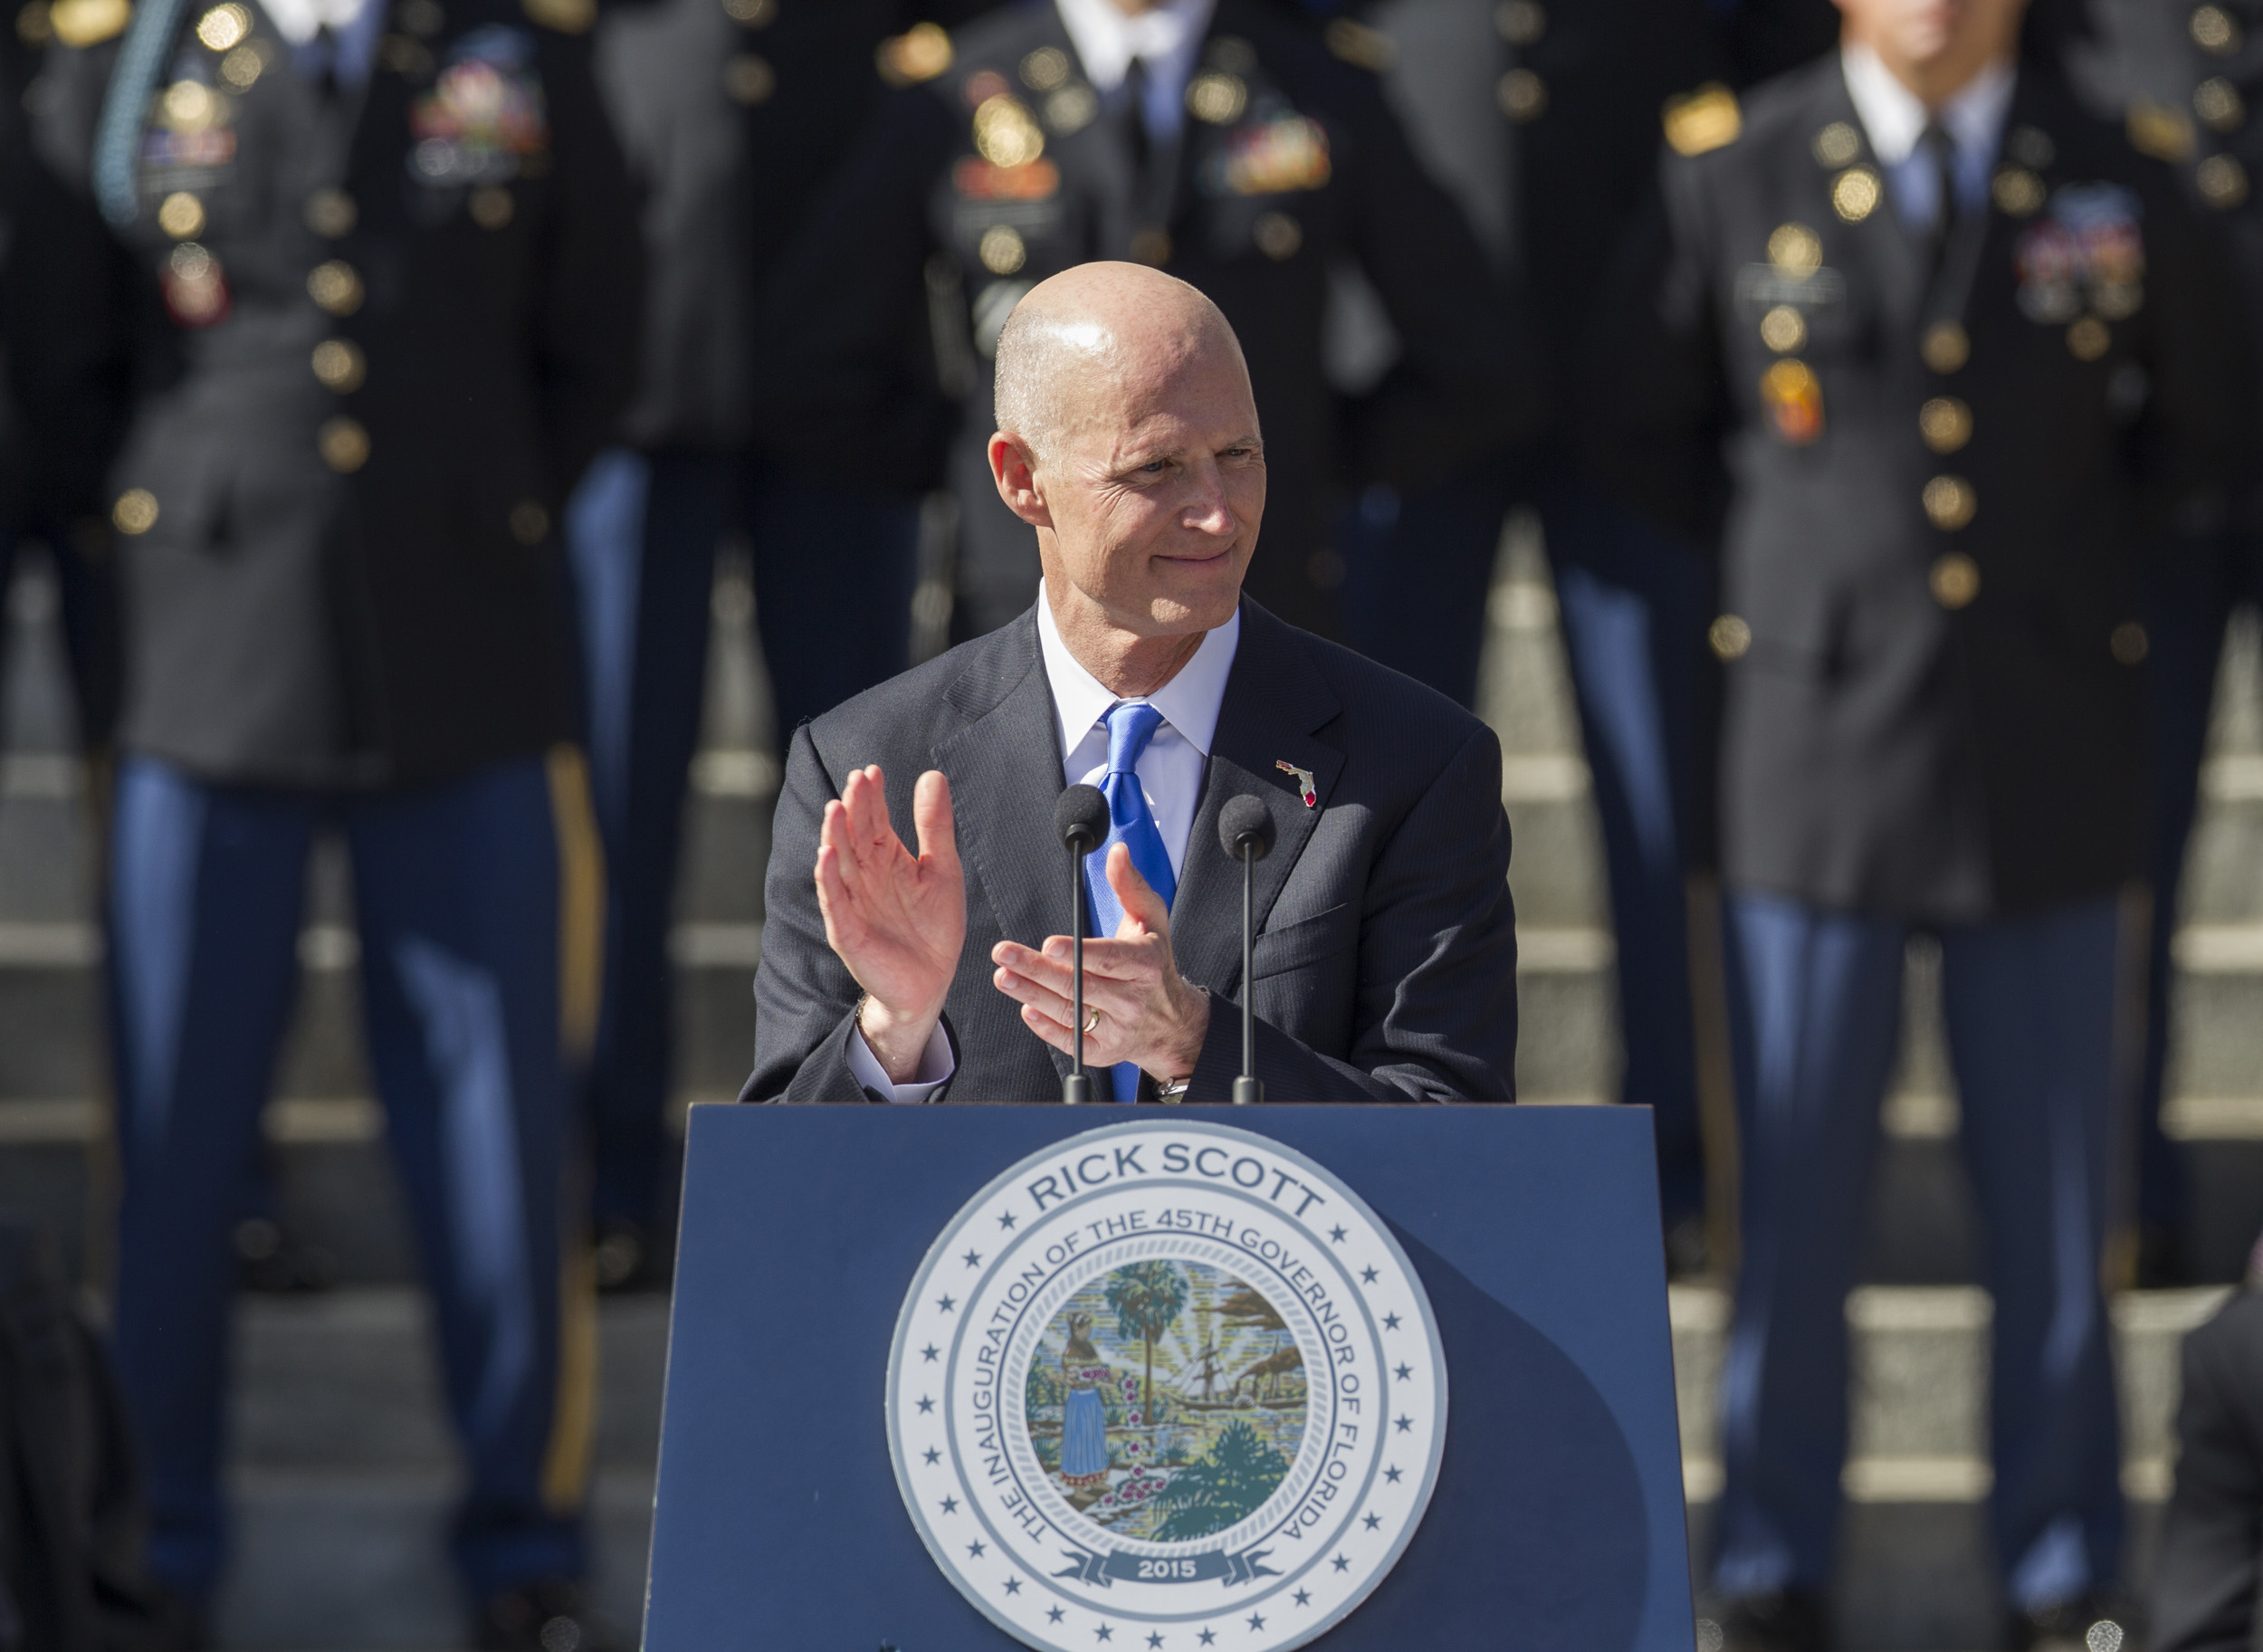 Florida Governor Rick Scott applauds during his speech after the swearing in for his second term as governor of Florida at the Florida state capitol in Tallahassee, Fla. on Jan. 6, 2015. (Mark Wallheiser—AP)